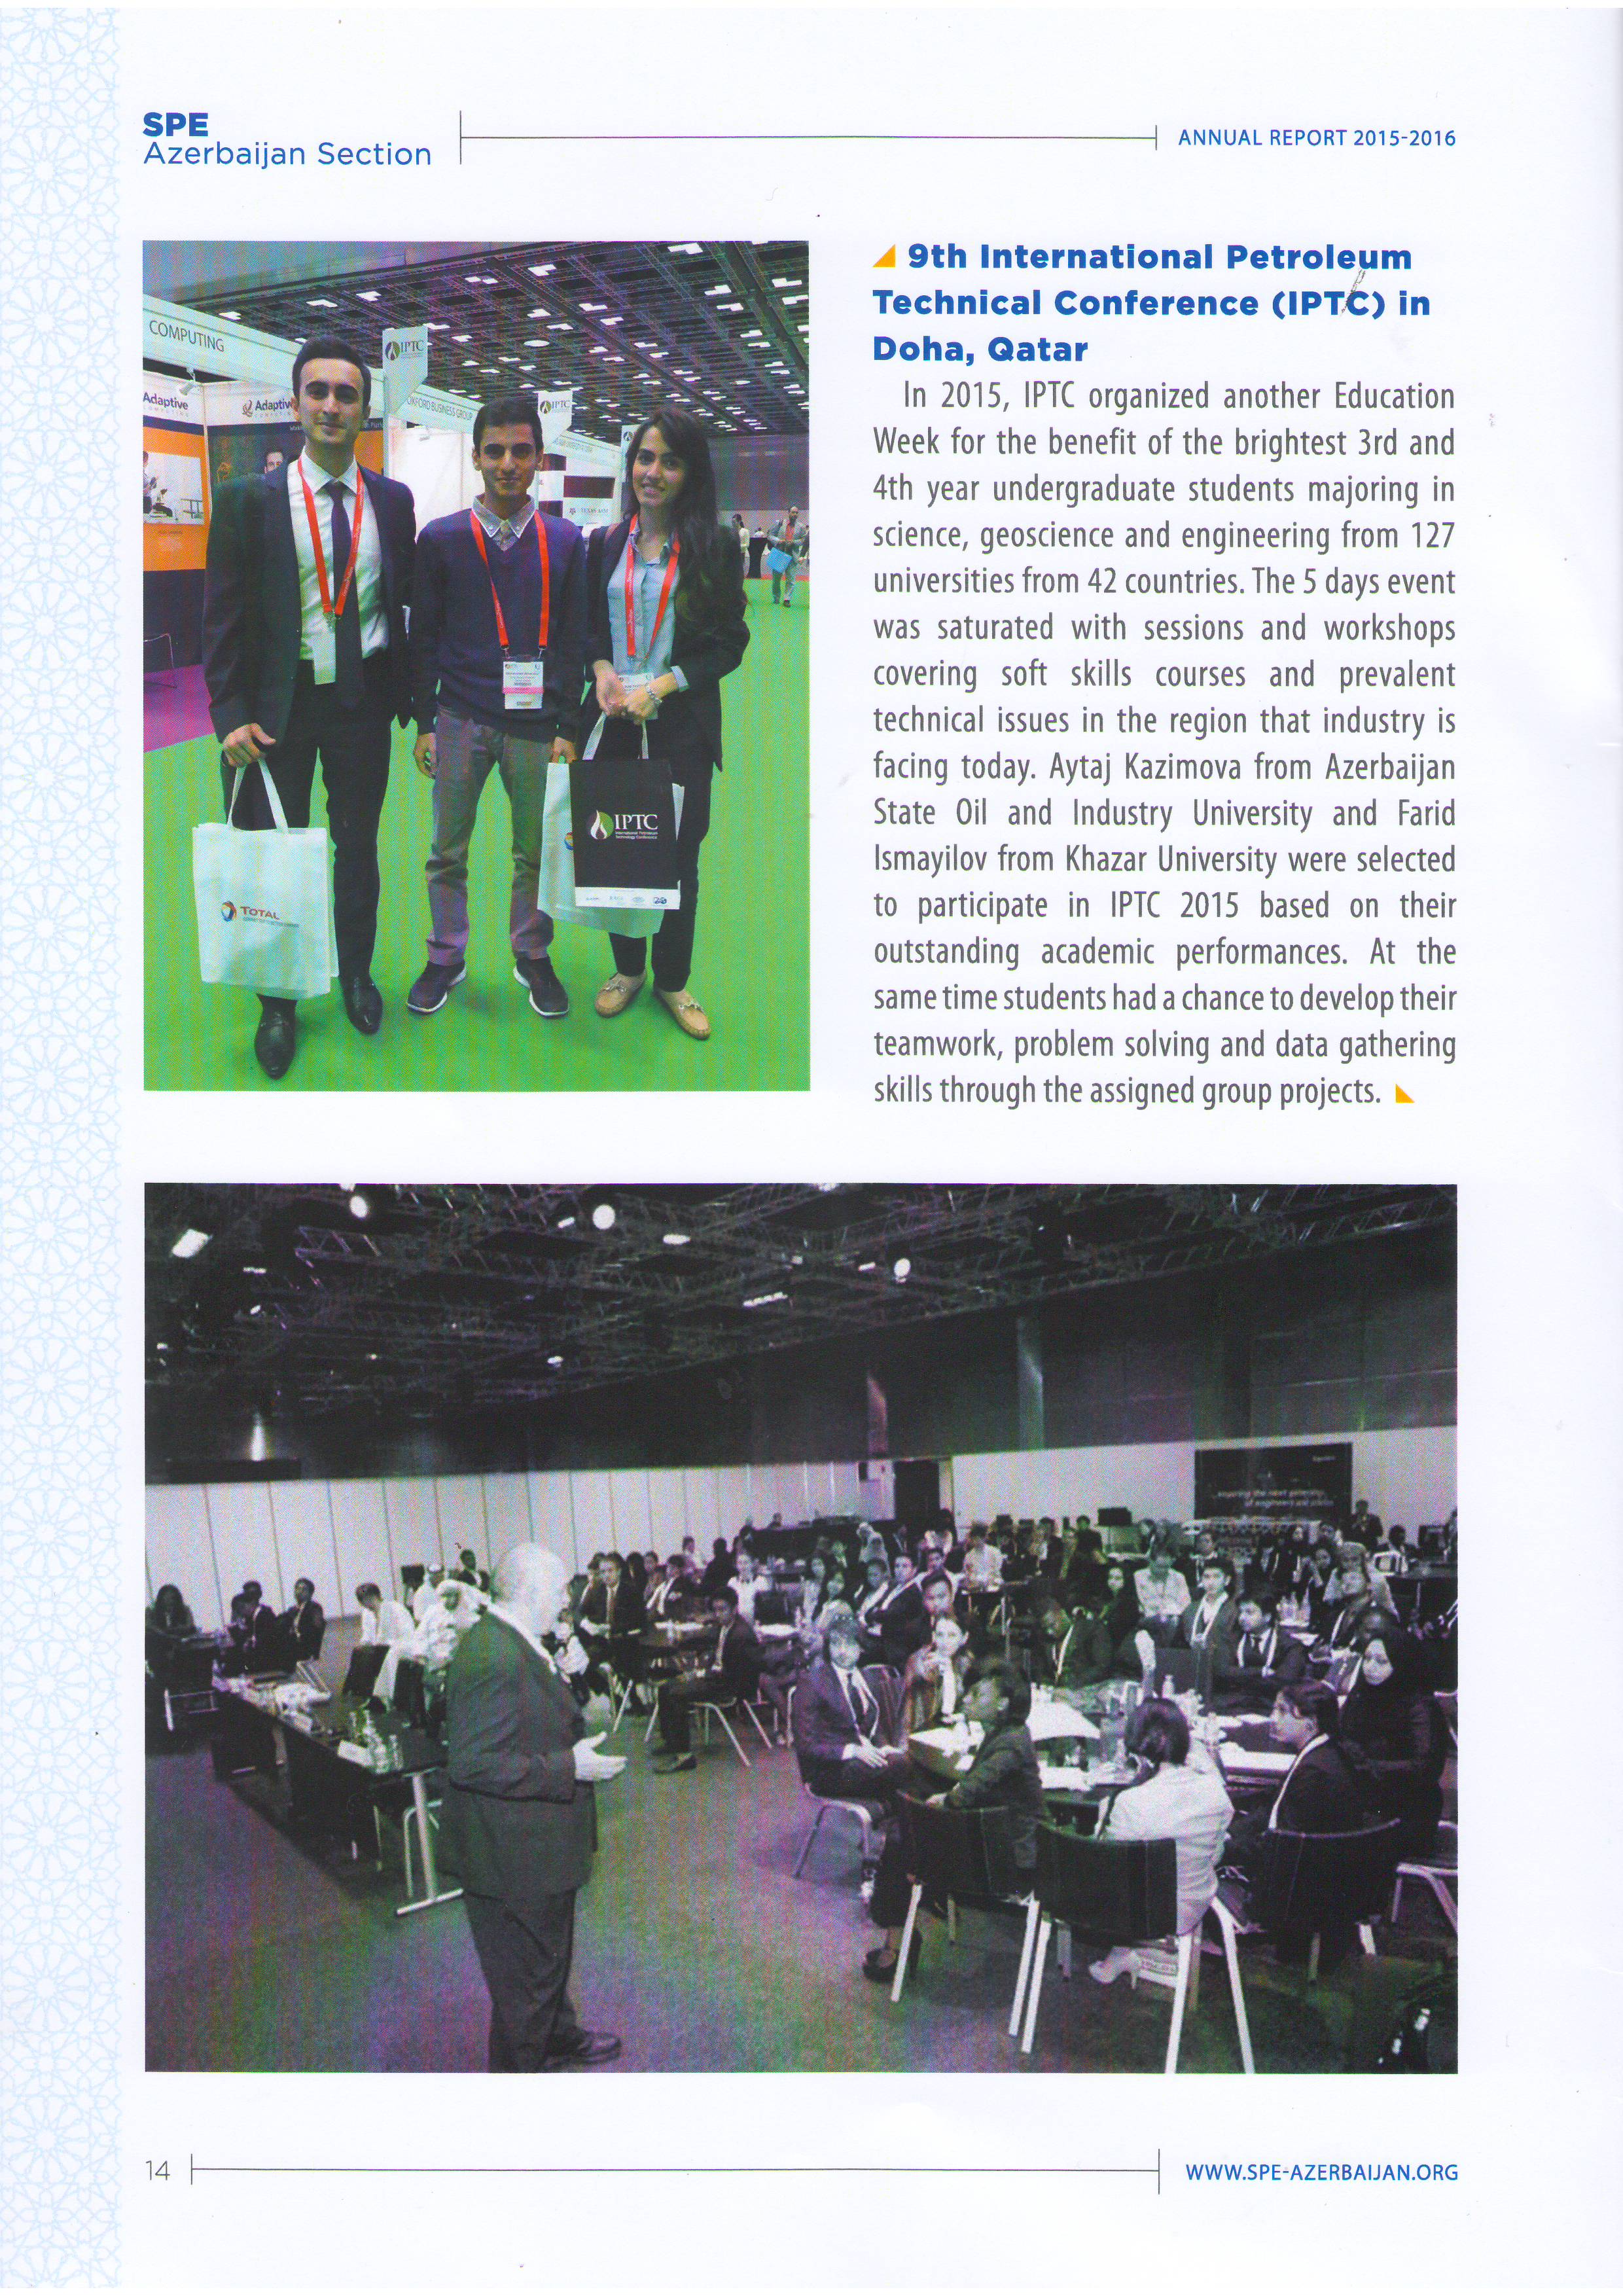 Article about Student’s Participation in International Conference in SPE Annual Report